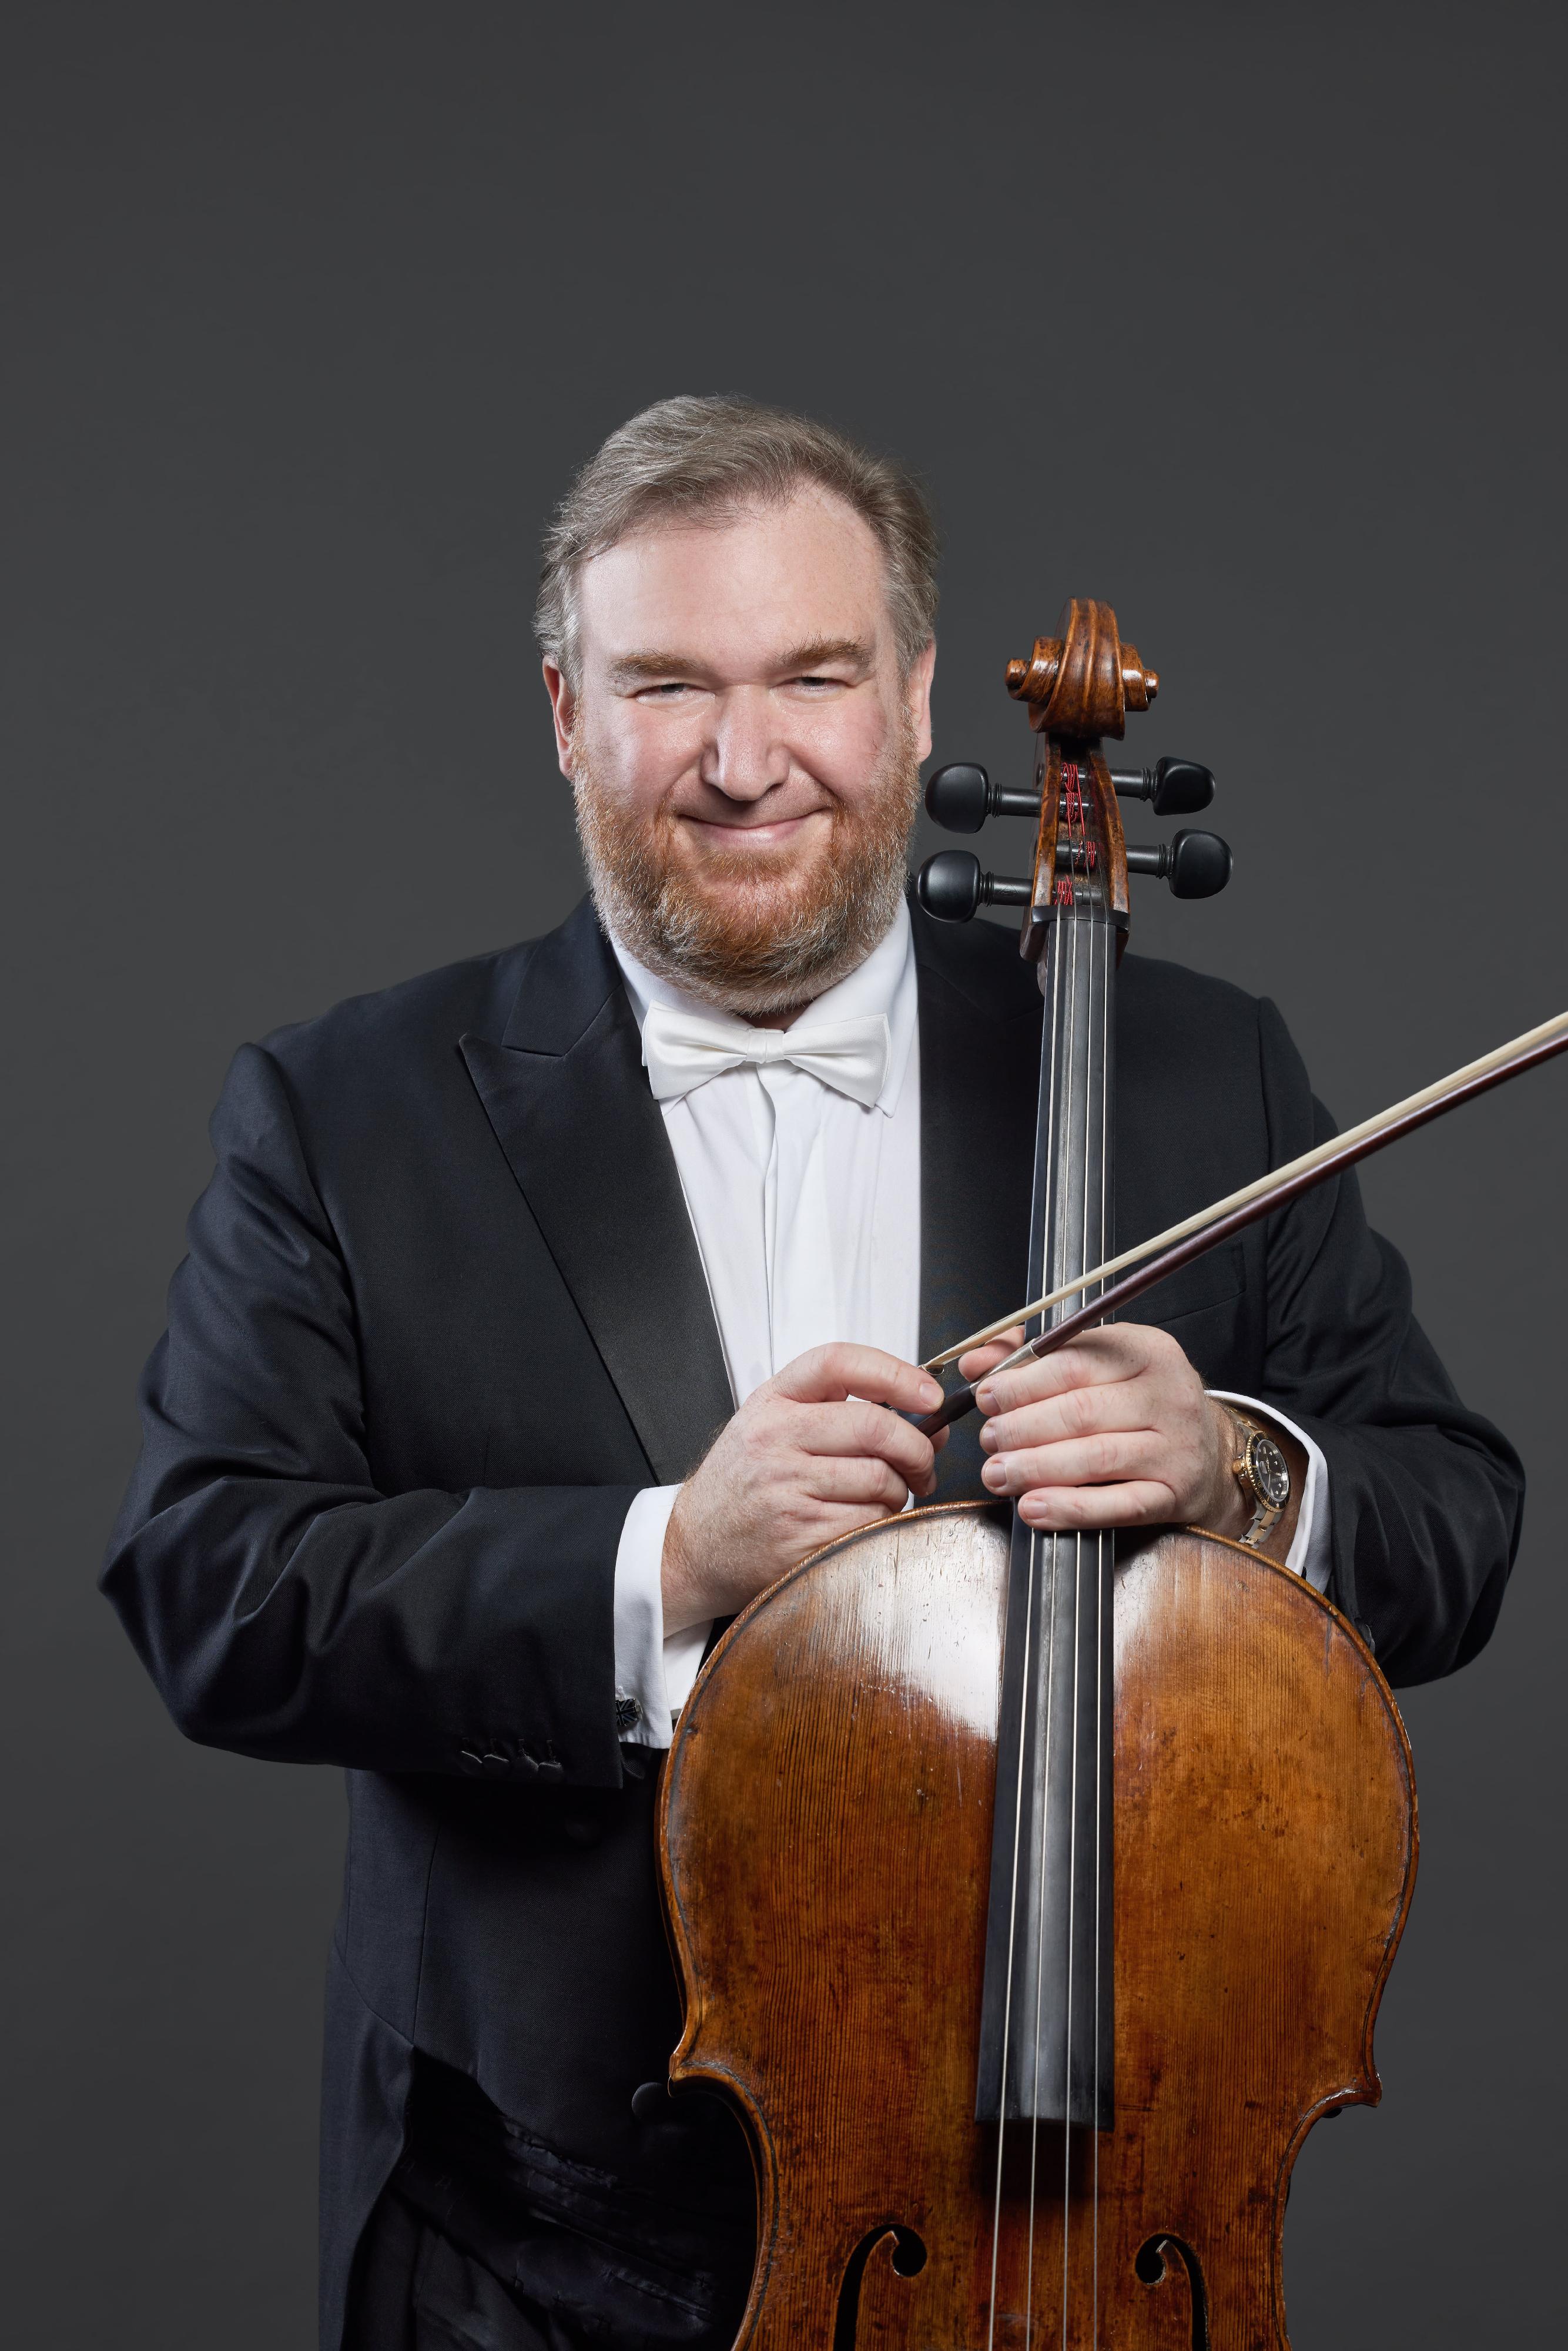 The Leisure and Cultural Services Department will present "The Contemporary Classics" concert in early October. Photo shows cellist Richard Bamping. (Source of photo: Keith Hiro)